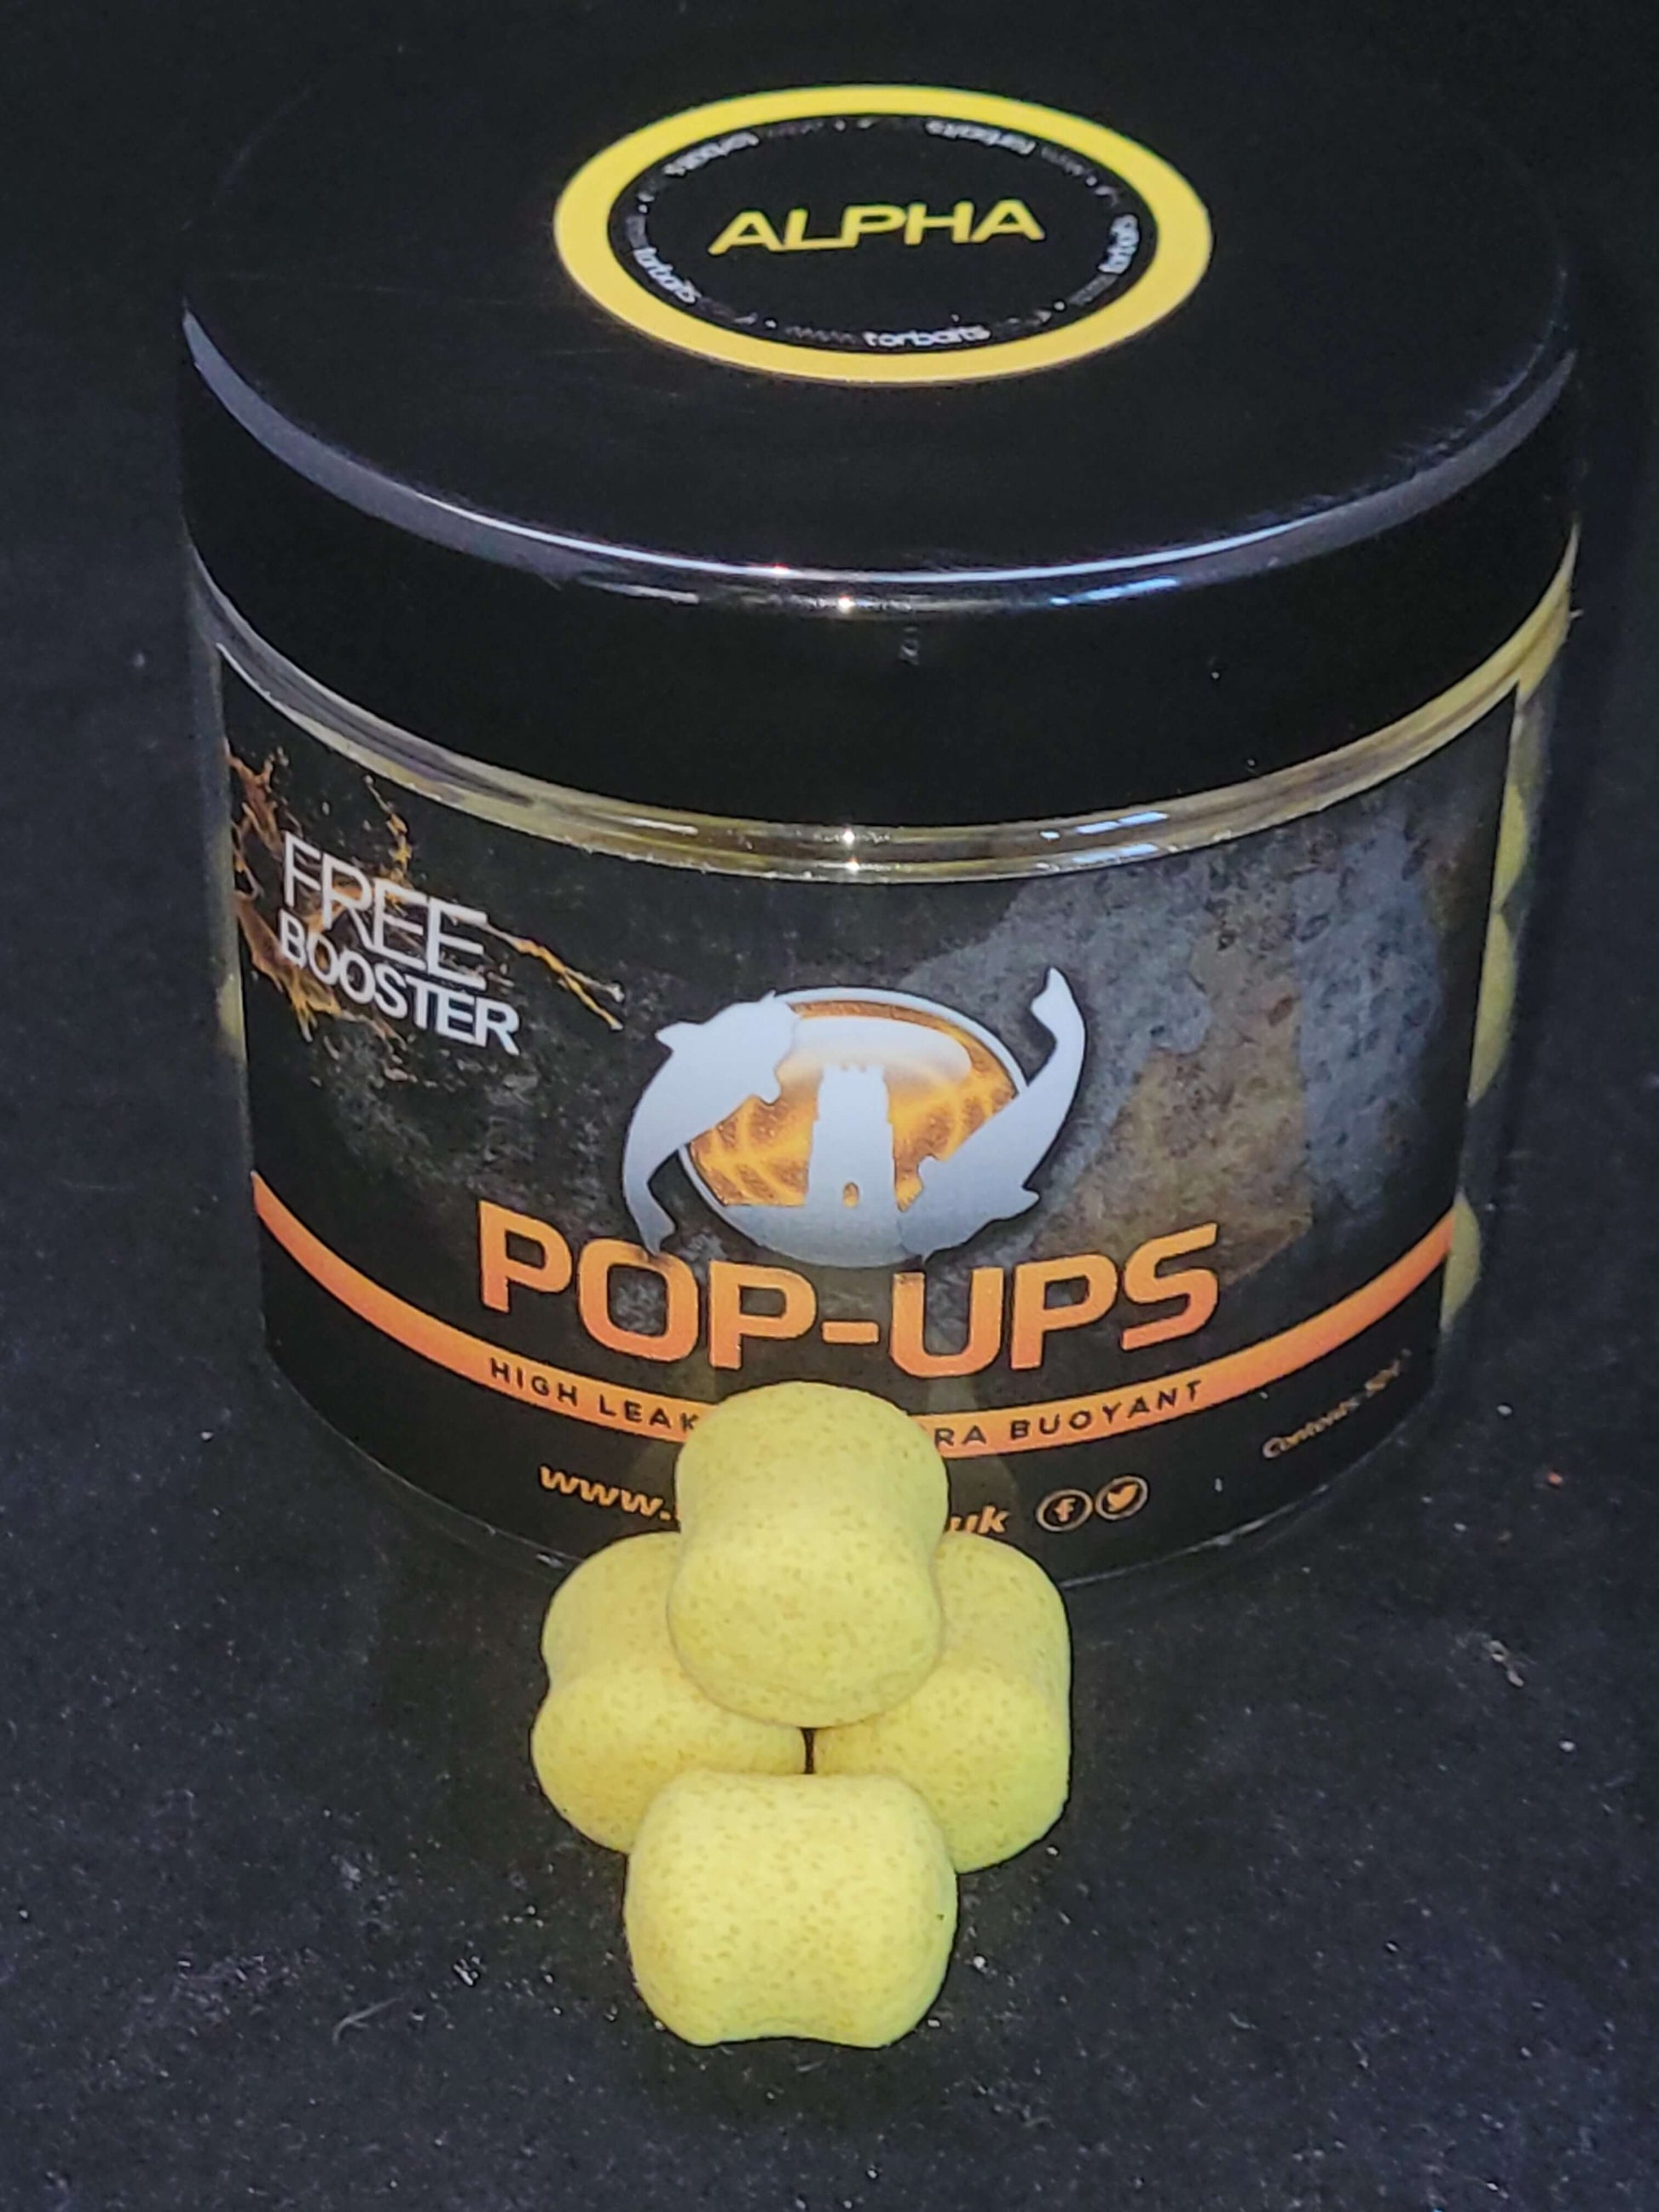 Cork Dust Wafters TorBaits